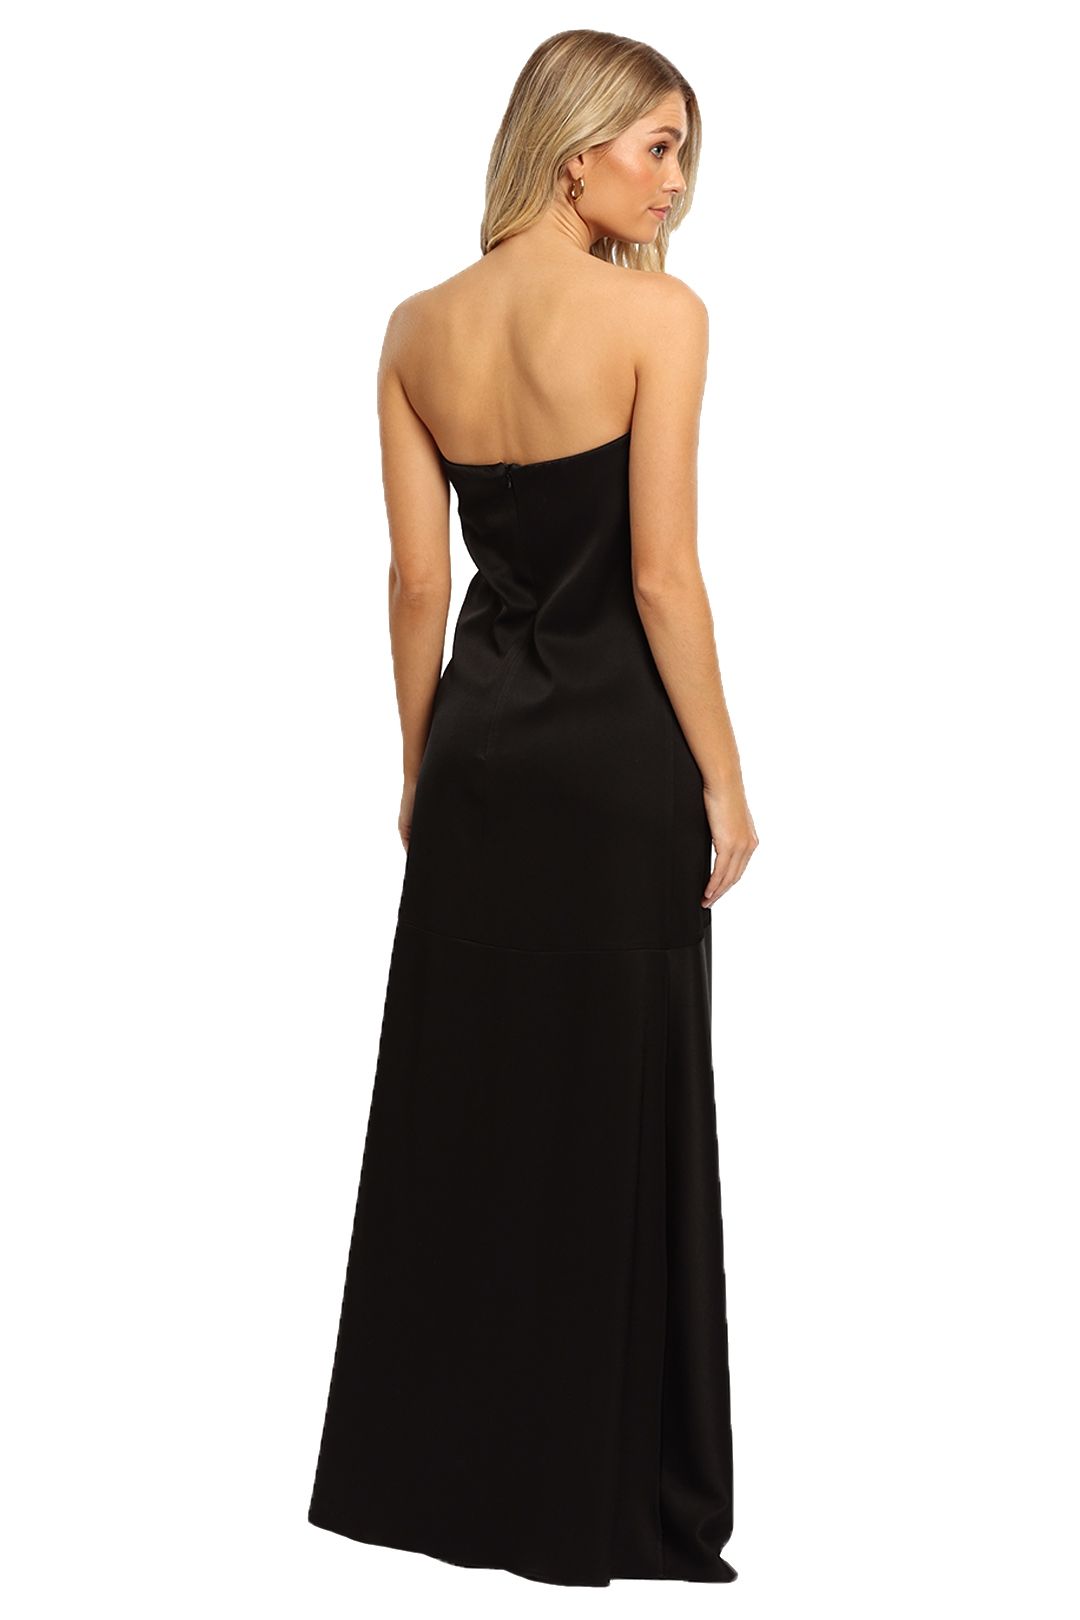 Camilla and Marc Strapless Akane Gown strapless